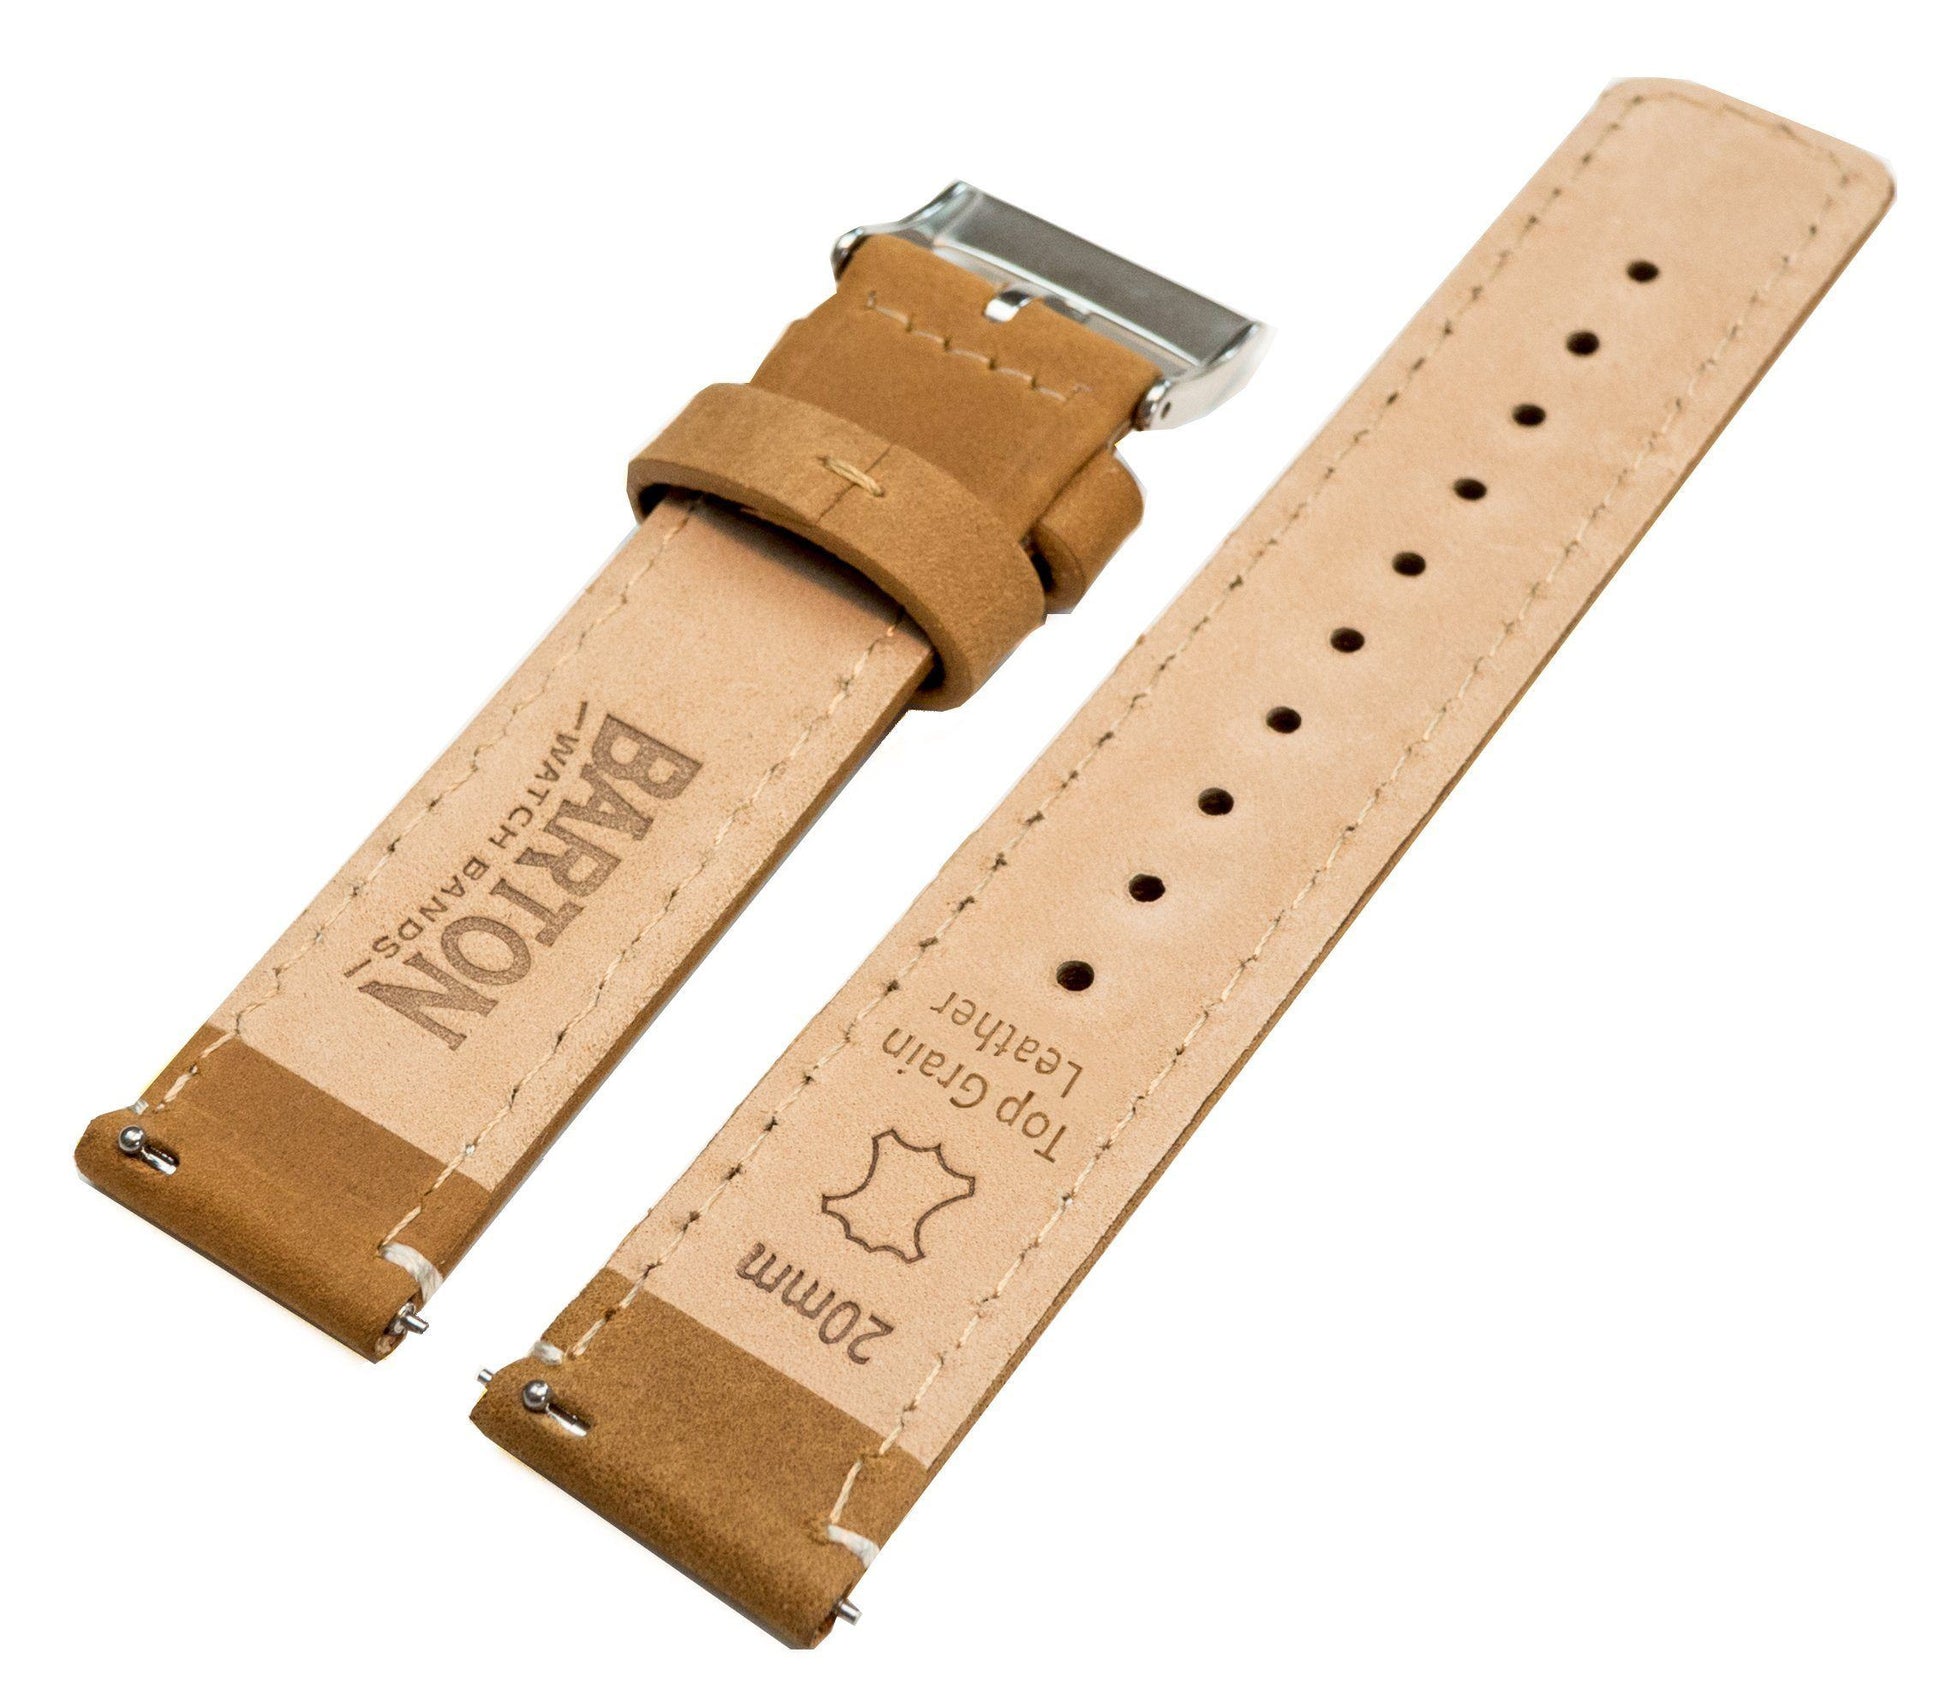 Moto 360 Gen2 | Gingerbread Brown Leather & Linen White Stitching - Barton Watch Bands